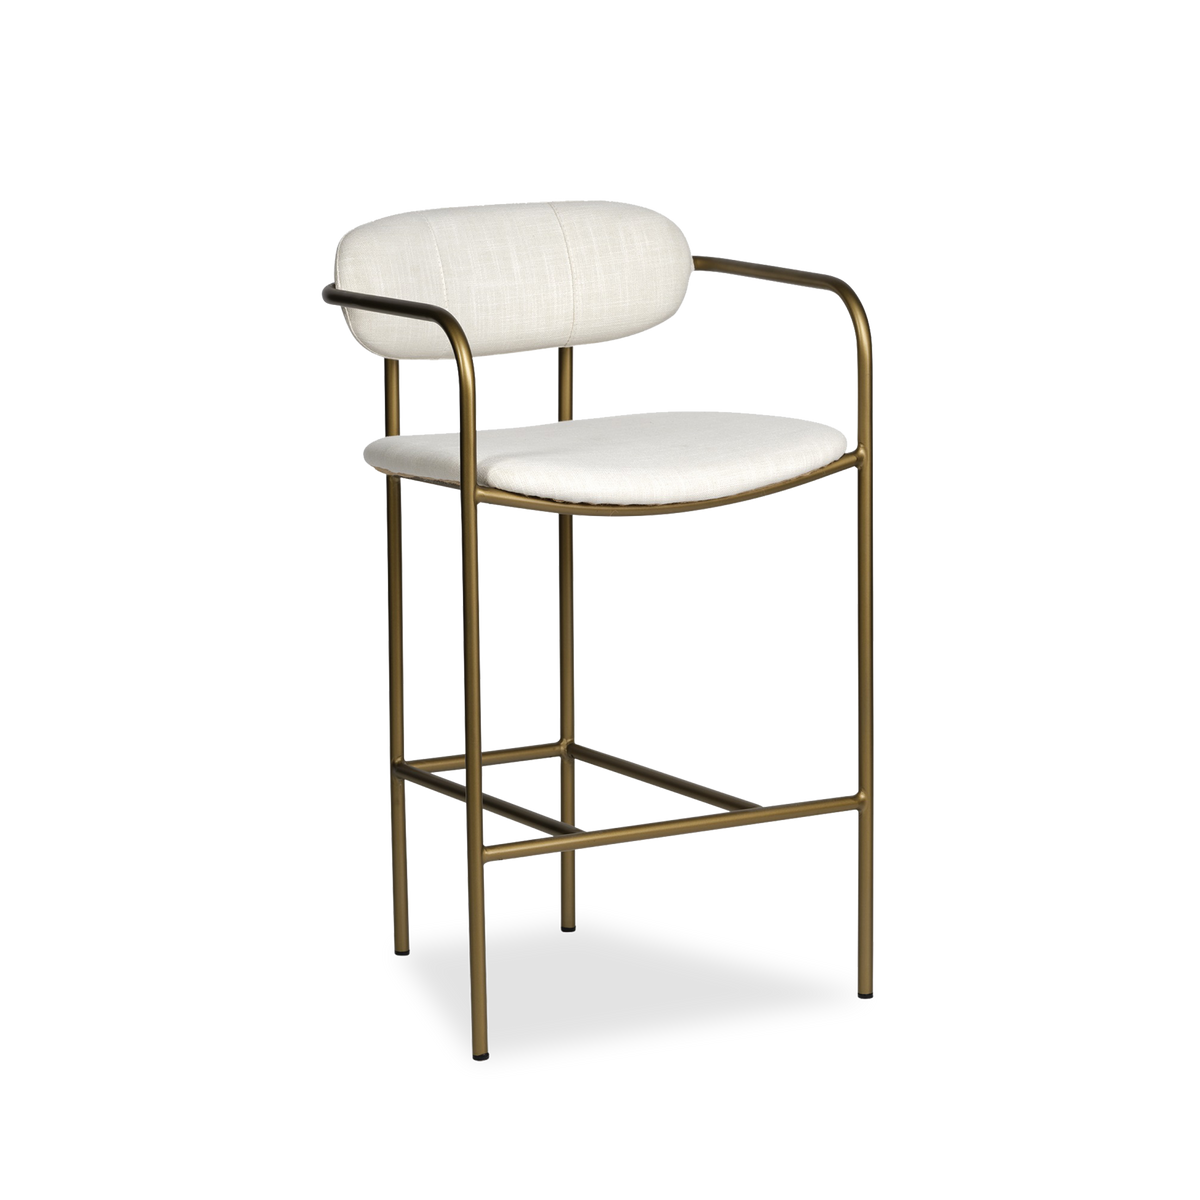 With its light frame, the Perry Counter Stool  flaunts a sleek silhouette full of modern ease.